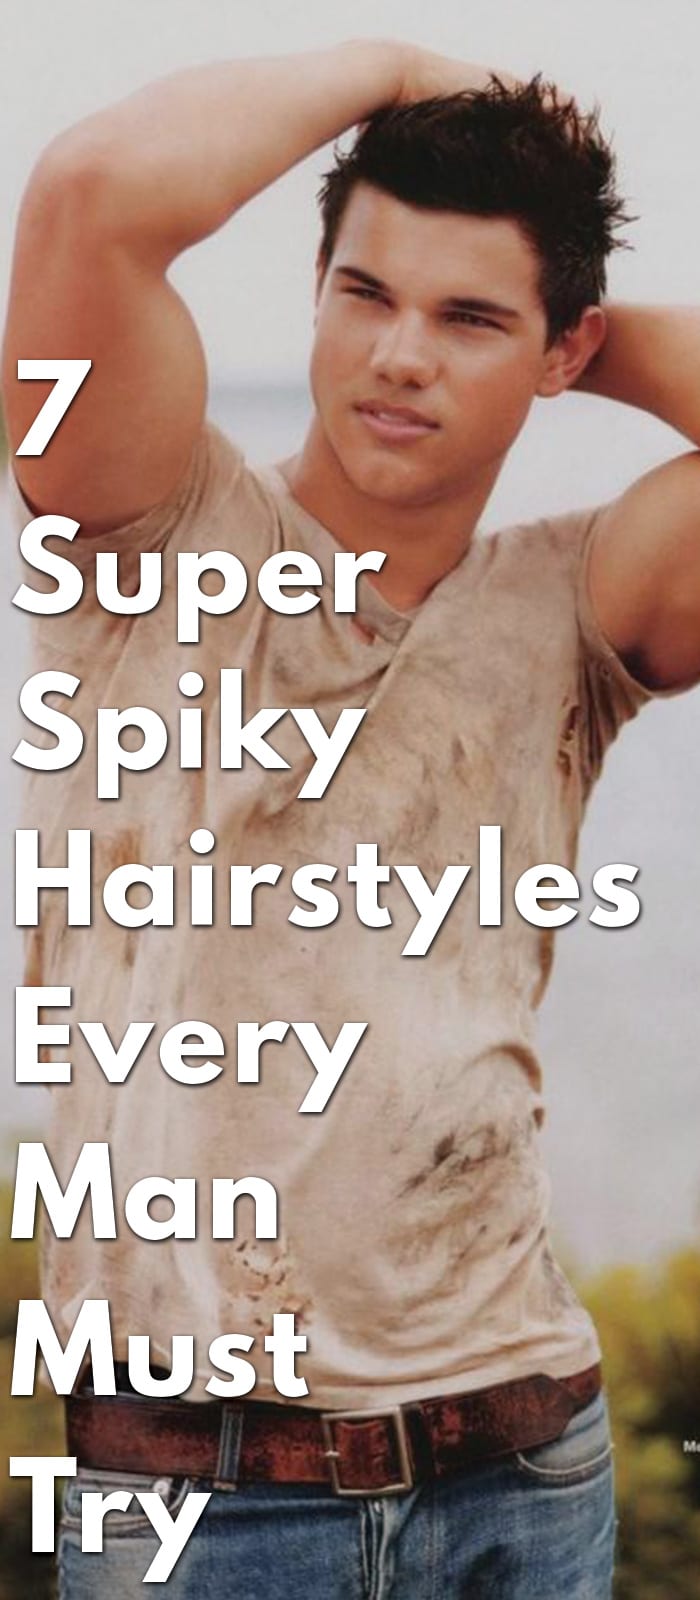 7-Super-Spiky-Hairstyles-Every-Man-Must-Try-In-2018